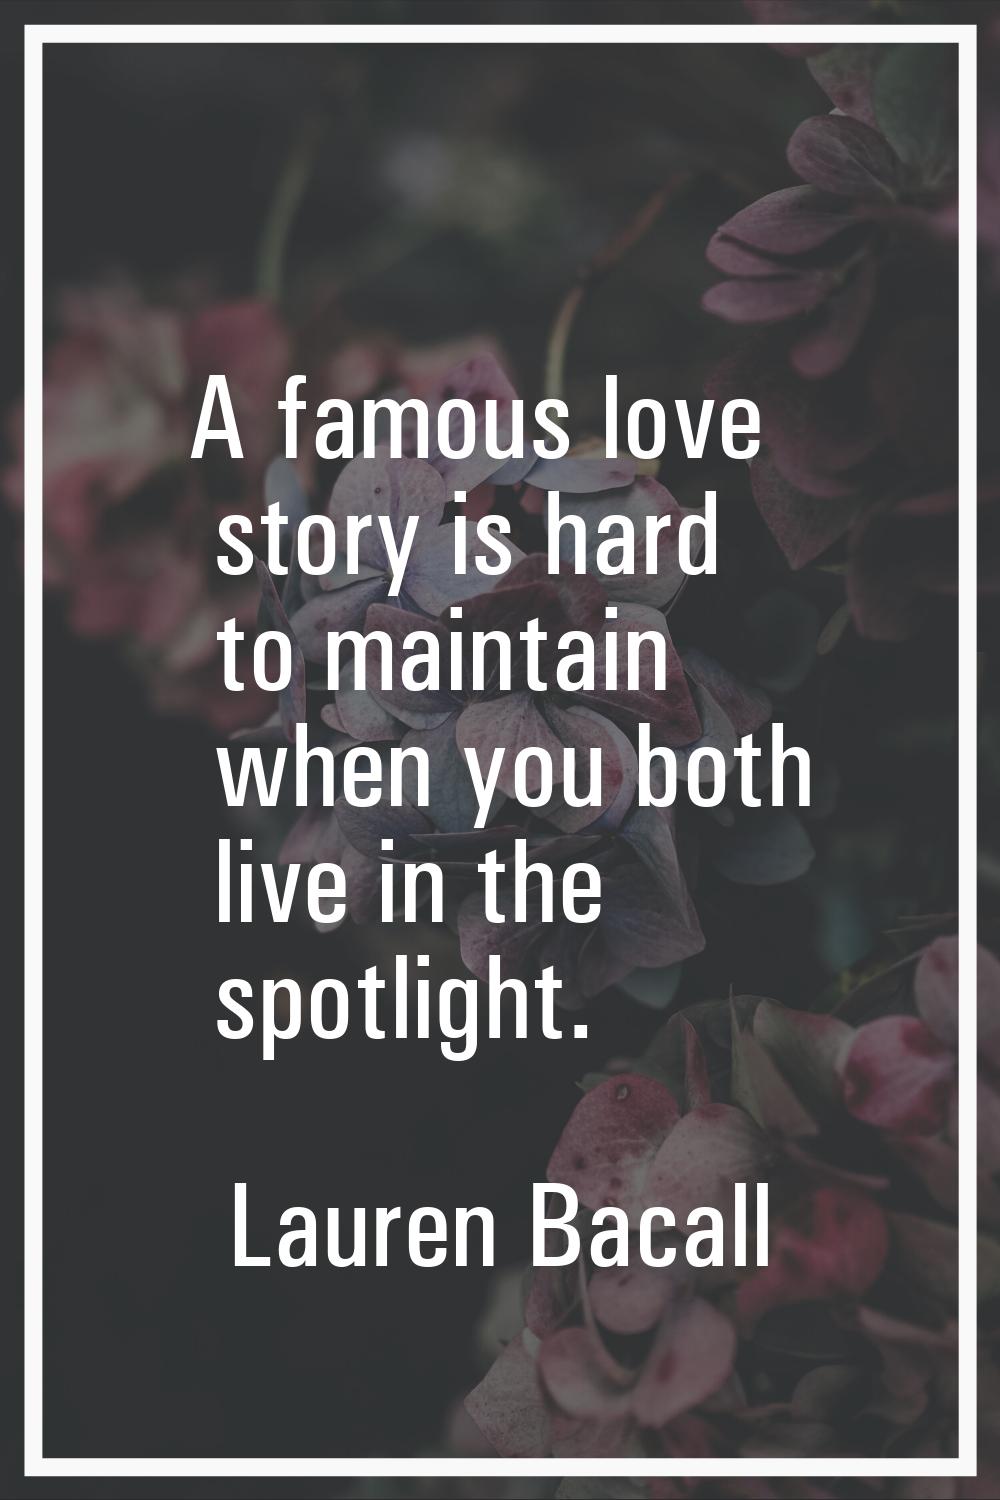 A famous love story is hard to maintain when you both live in the spotlight.